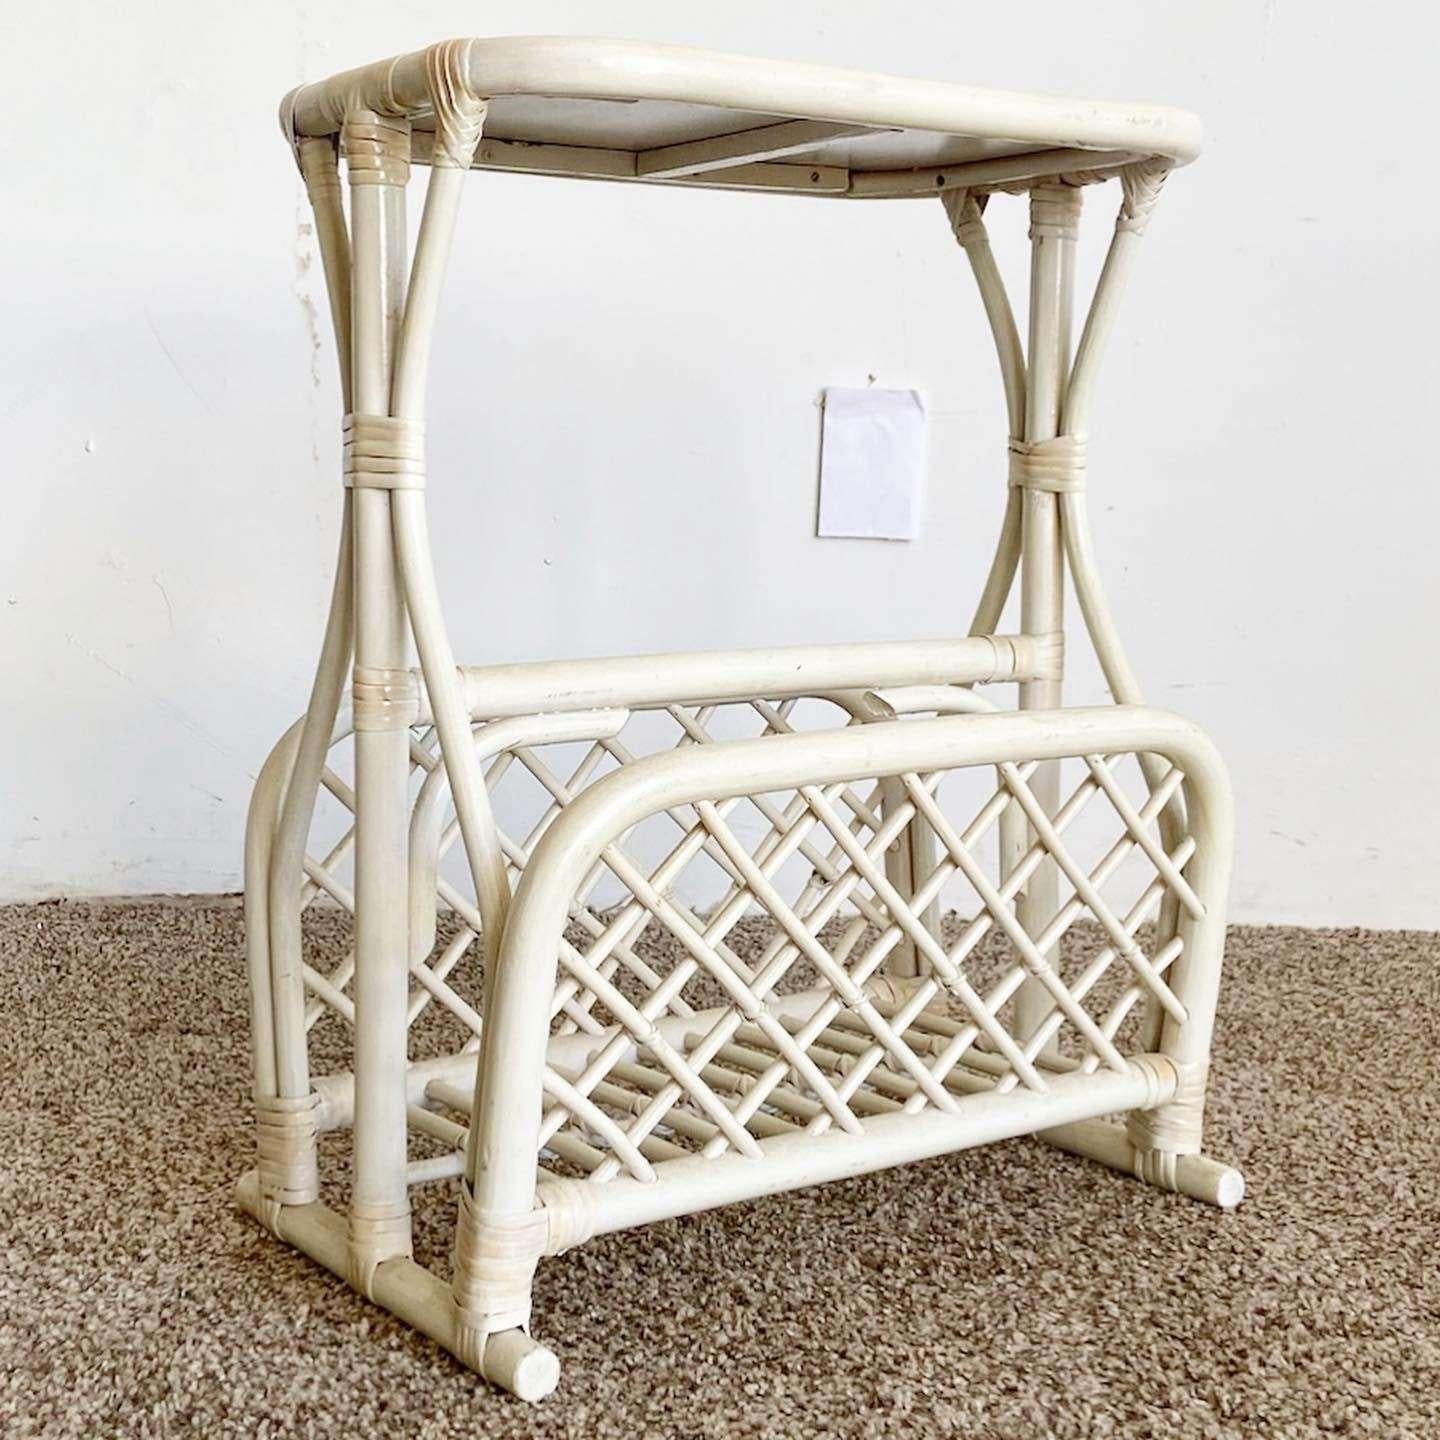 Amazing vintage bohemian bamboo rattan and wicker side table/magazine rack. Features an off white finish with a wicker top.